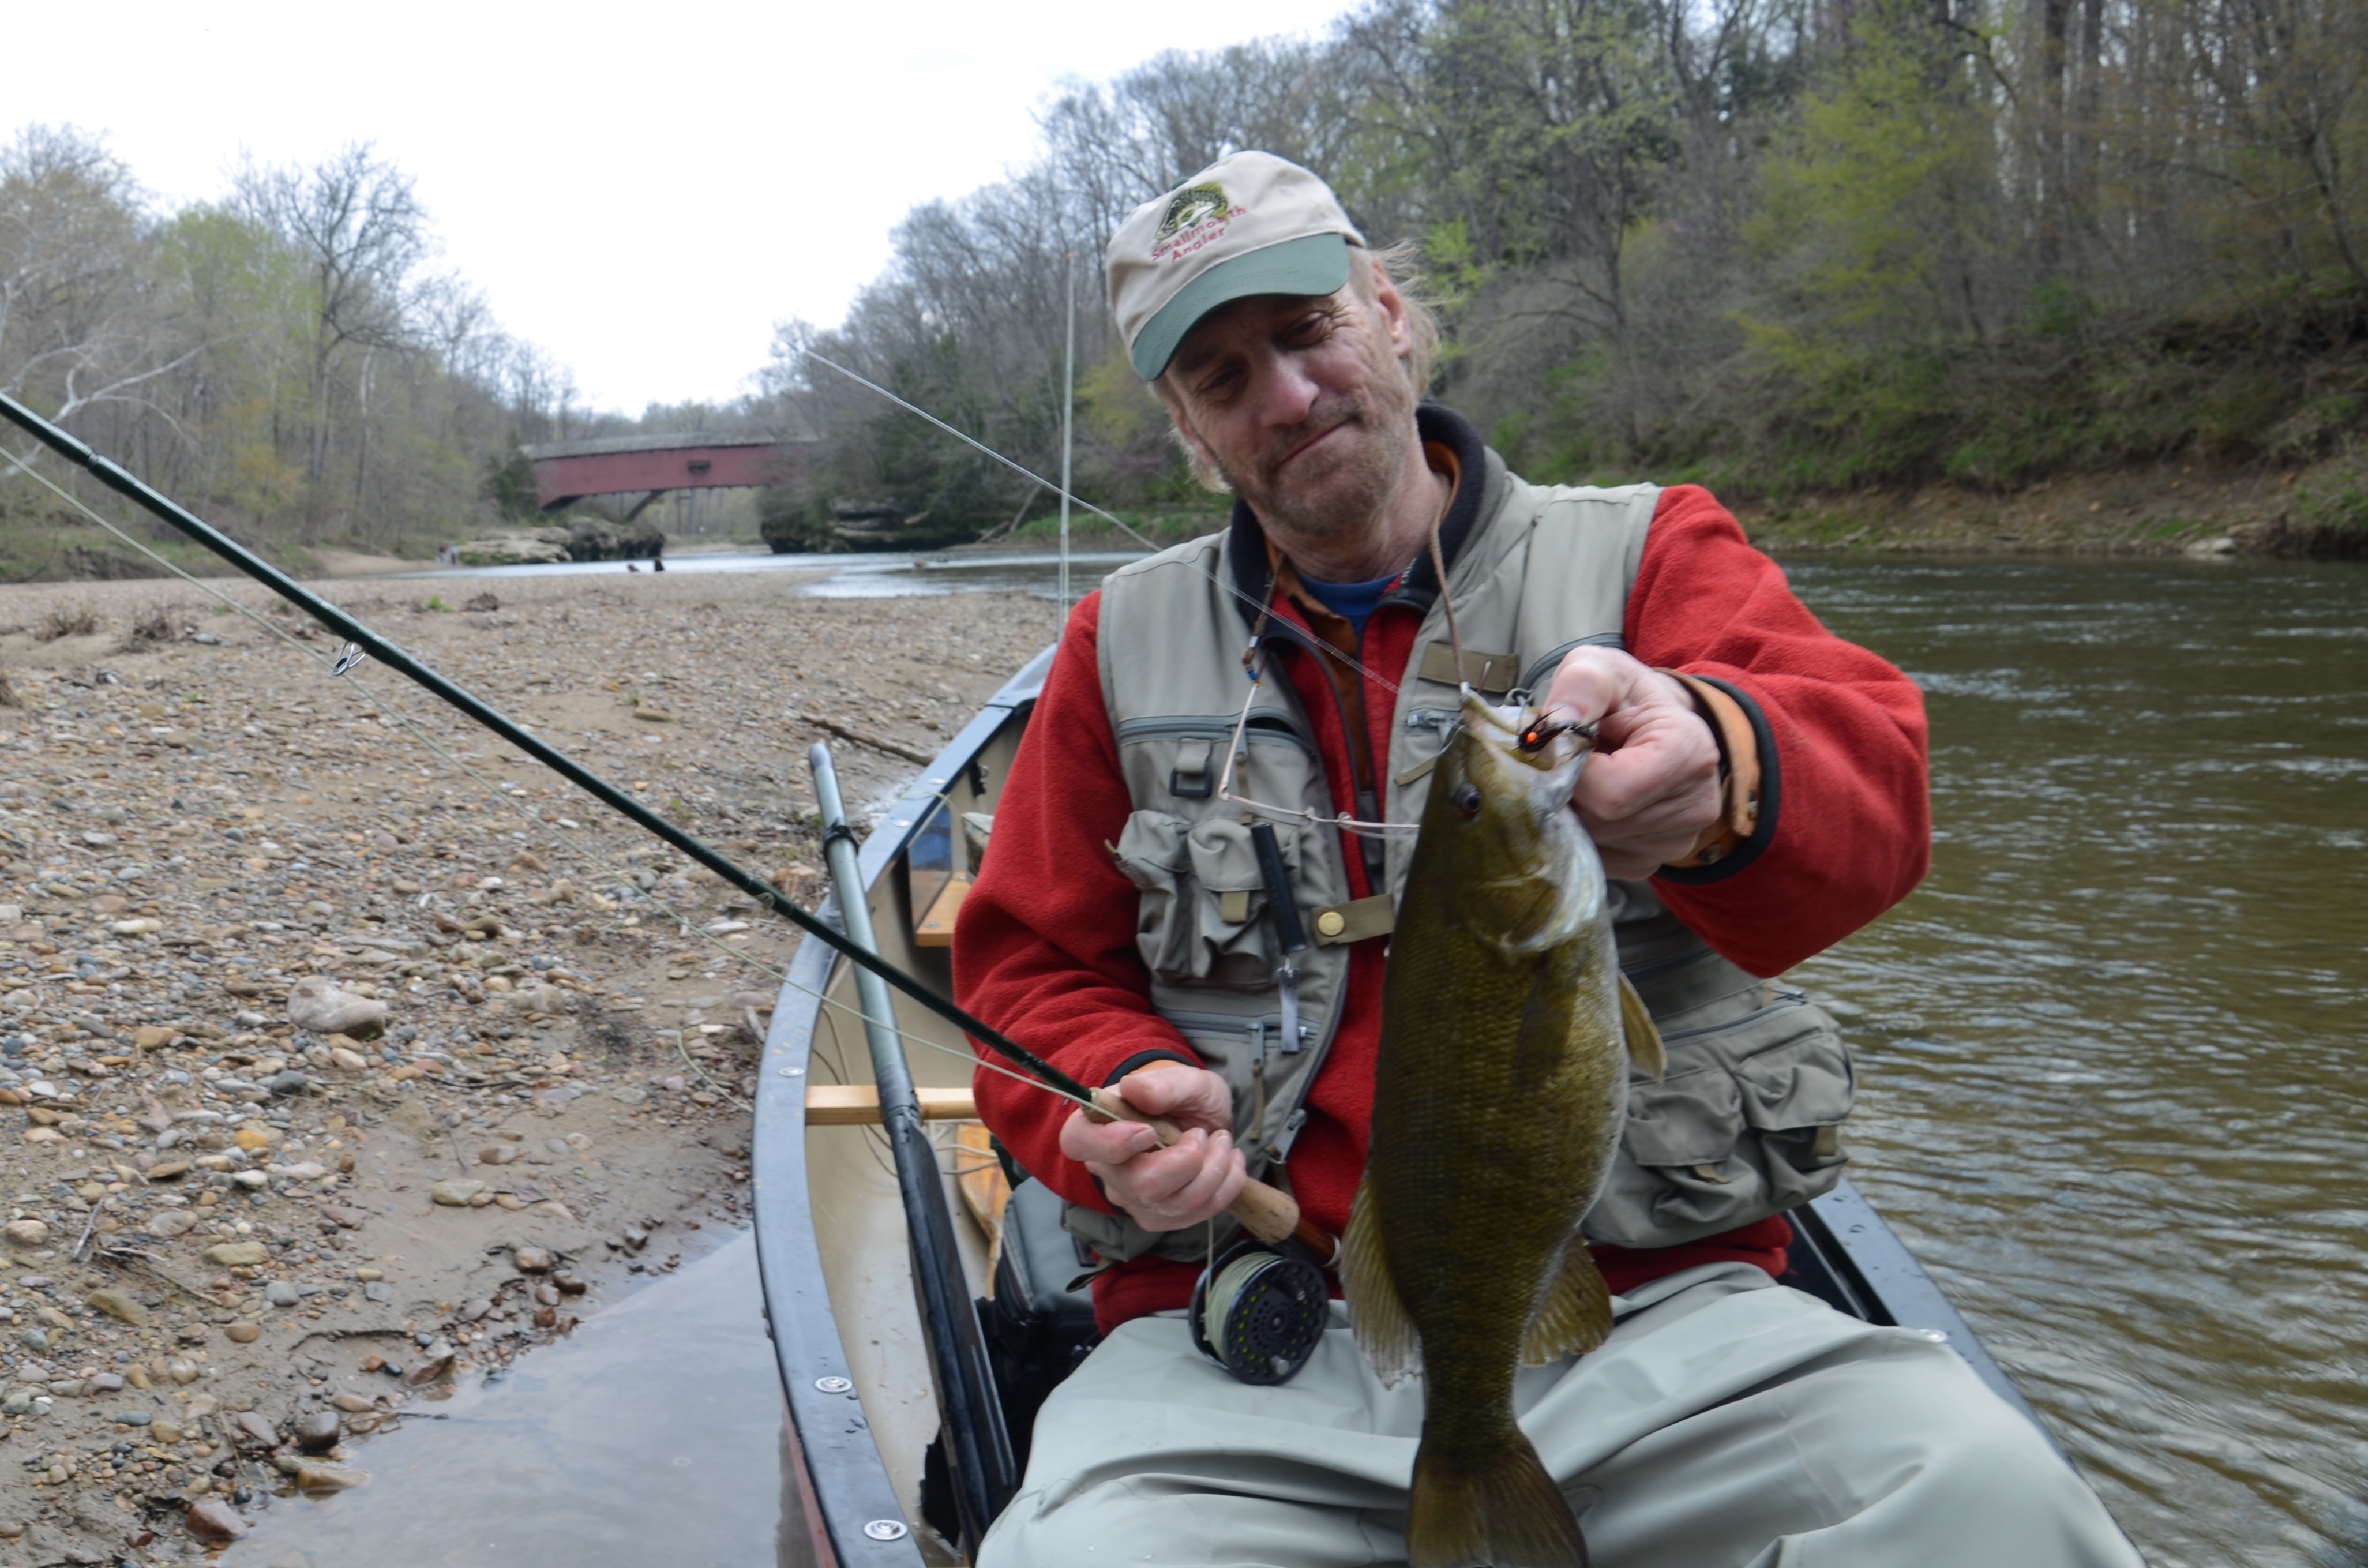 Smallmouth Bass expert, Tim Holschlag travels the world in search of bronzebacks.